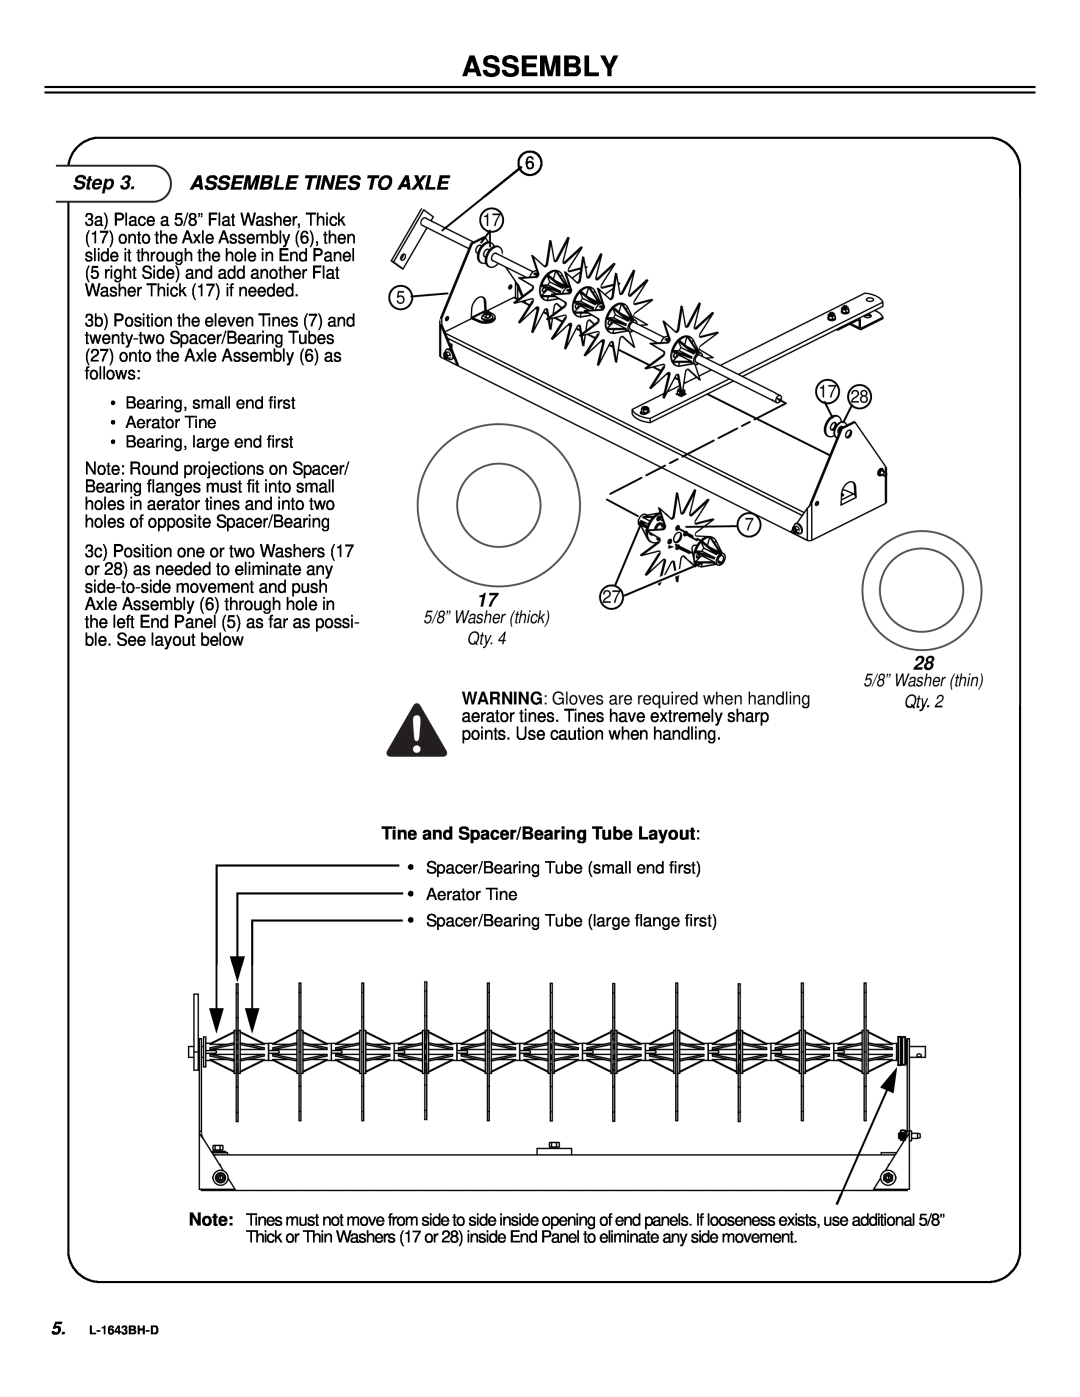 Sears S A T - 4 0 B H owner manual Assemble Tines To Axle, 5/8” Washer thick Qty, 5/8” Washer thin Qty, Assembly 